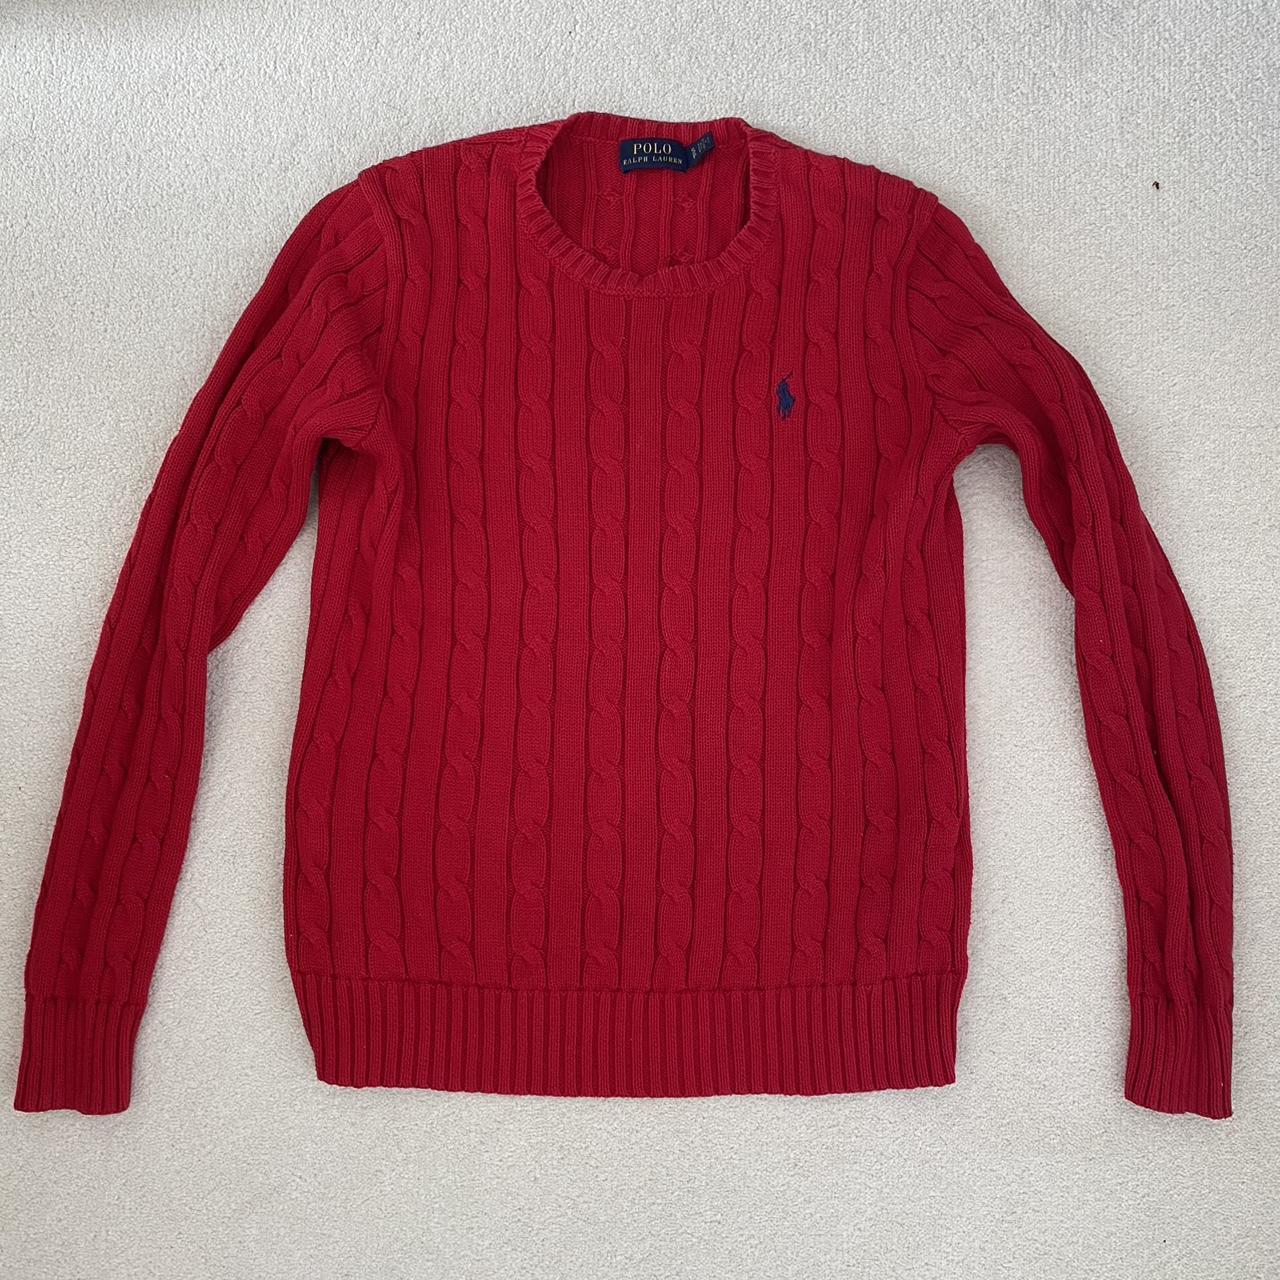 Polo Ralph Lauren red cable knit jumper Size S,... - Depop